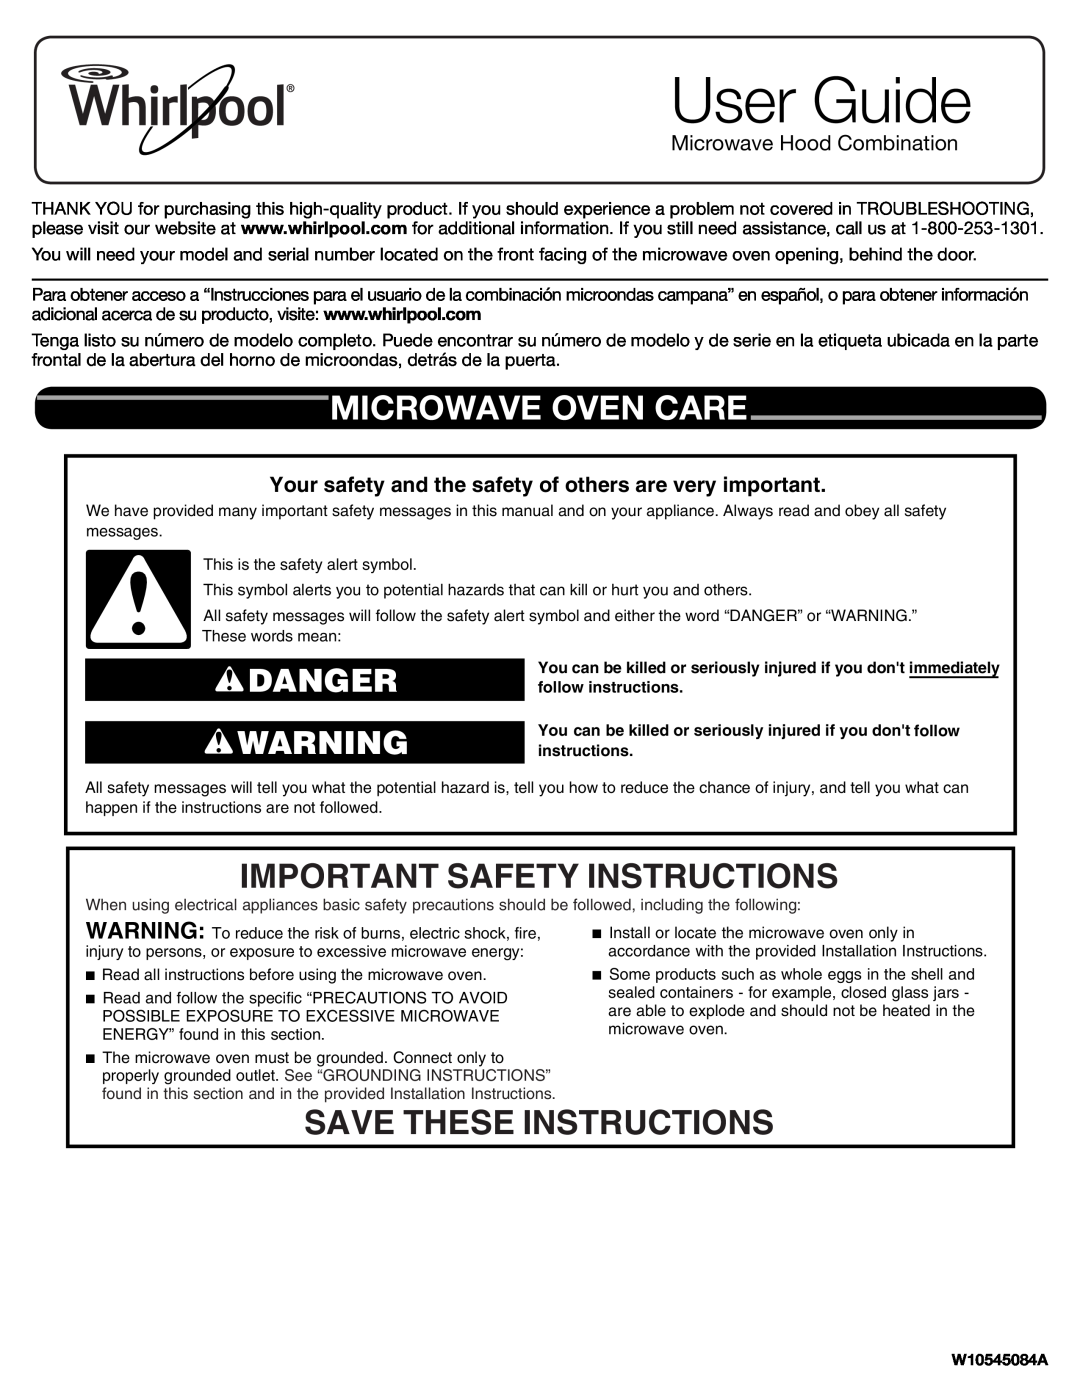 Whirlpool W10545084A important safety instructions Microwave Oven Care, Important Safety Instructions, User Guide, Danger 